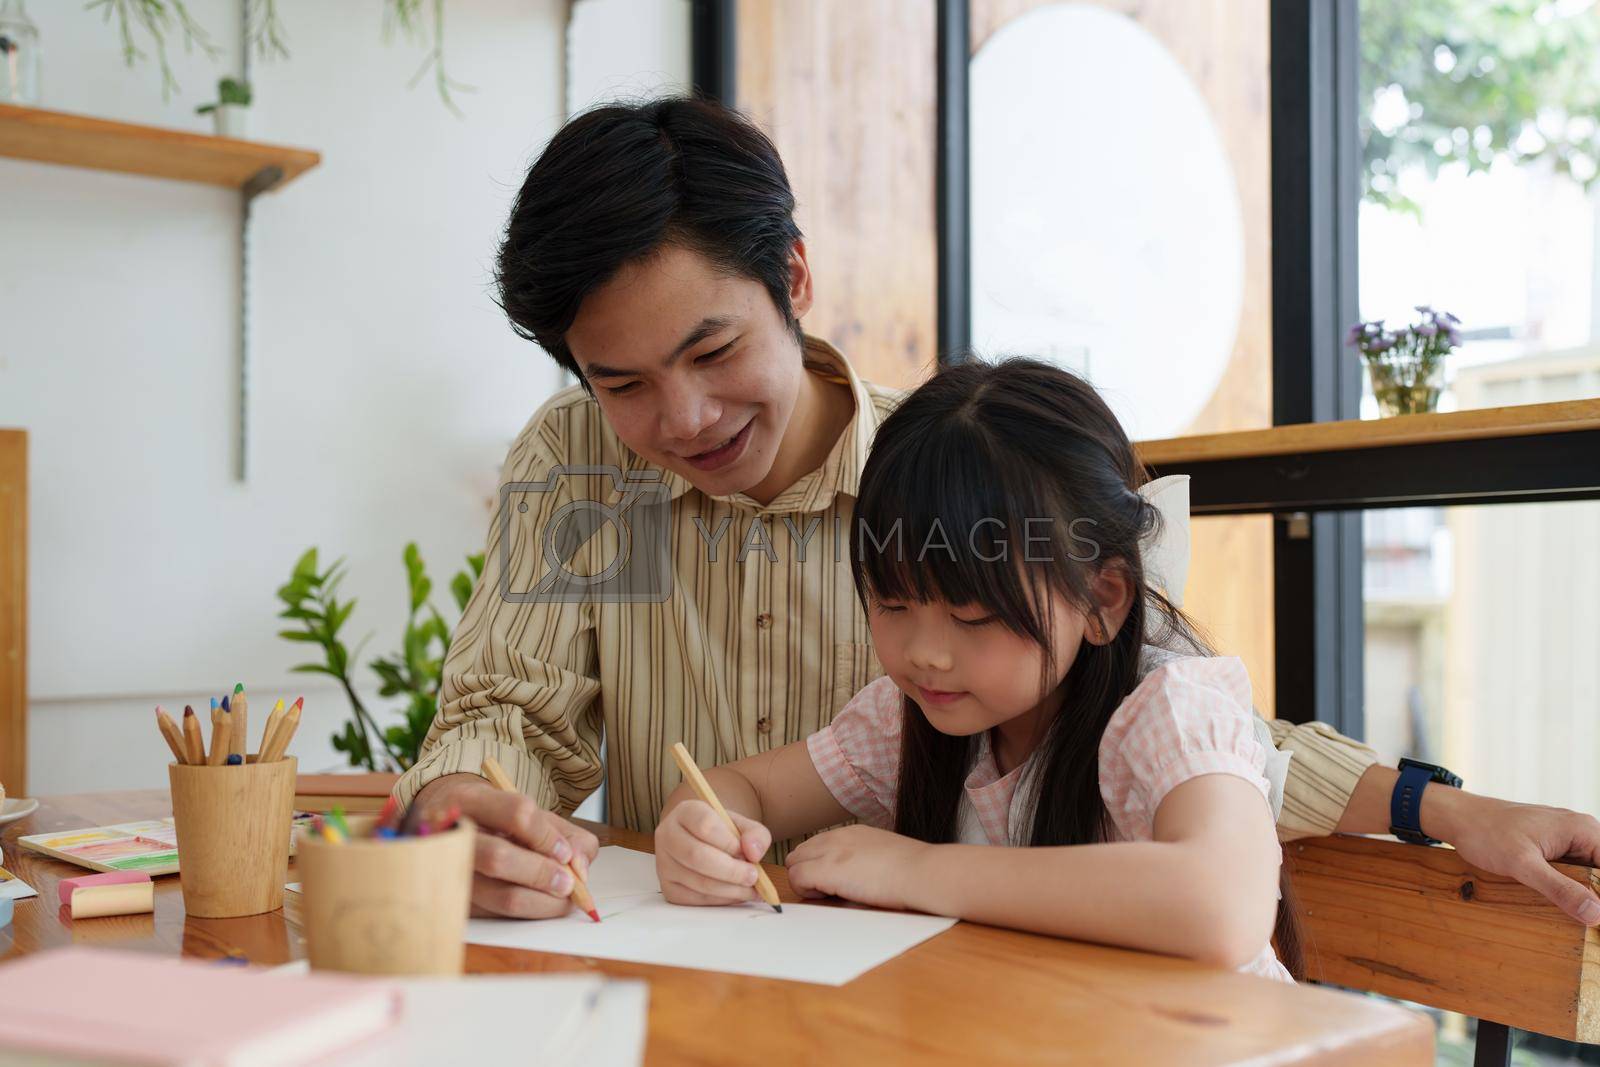 Royalty free image of A happy kid and father painting at home. Handmade skills training by itchaznong